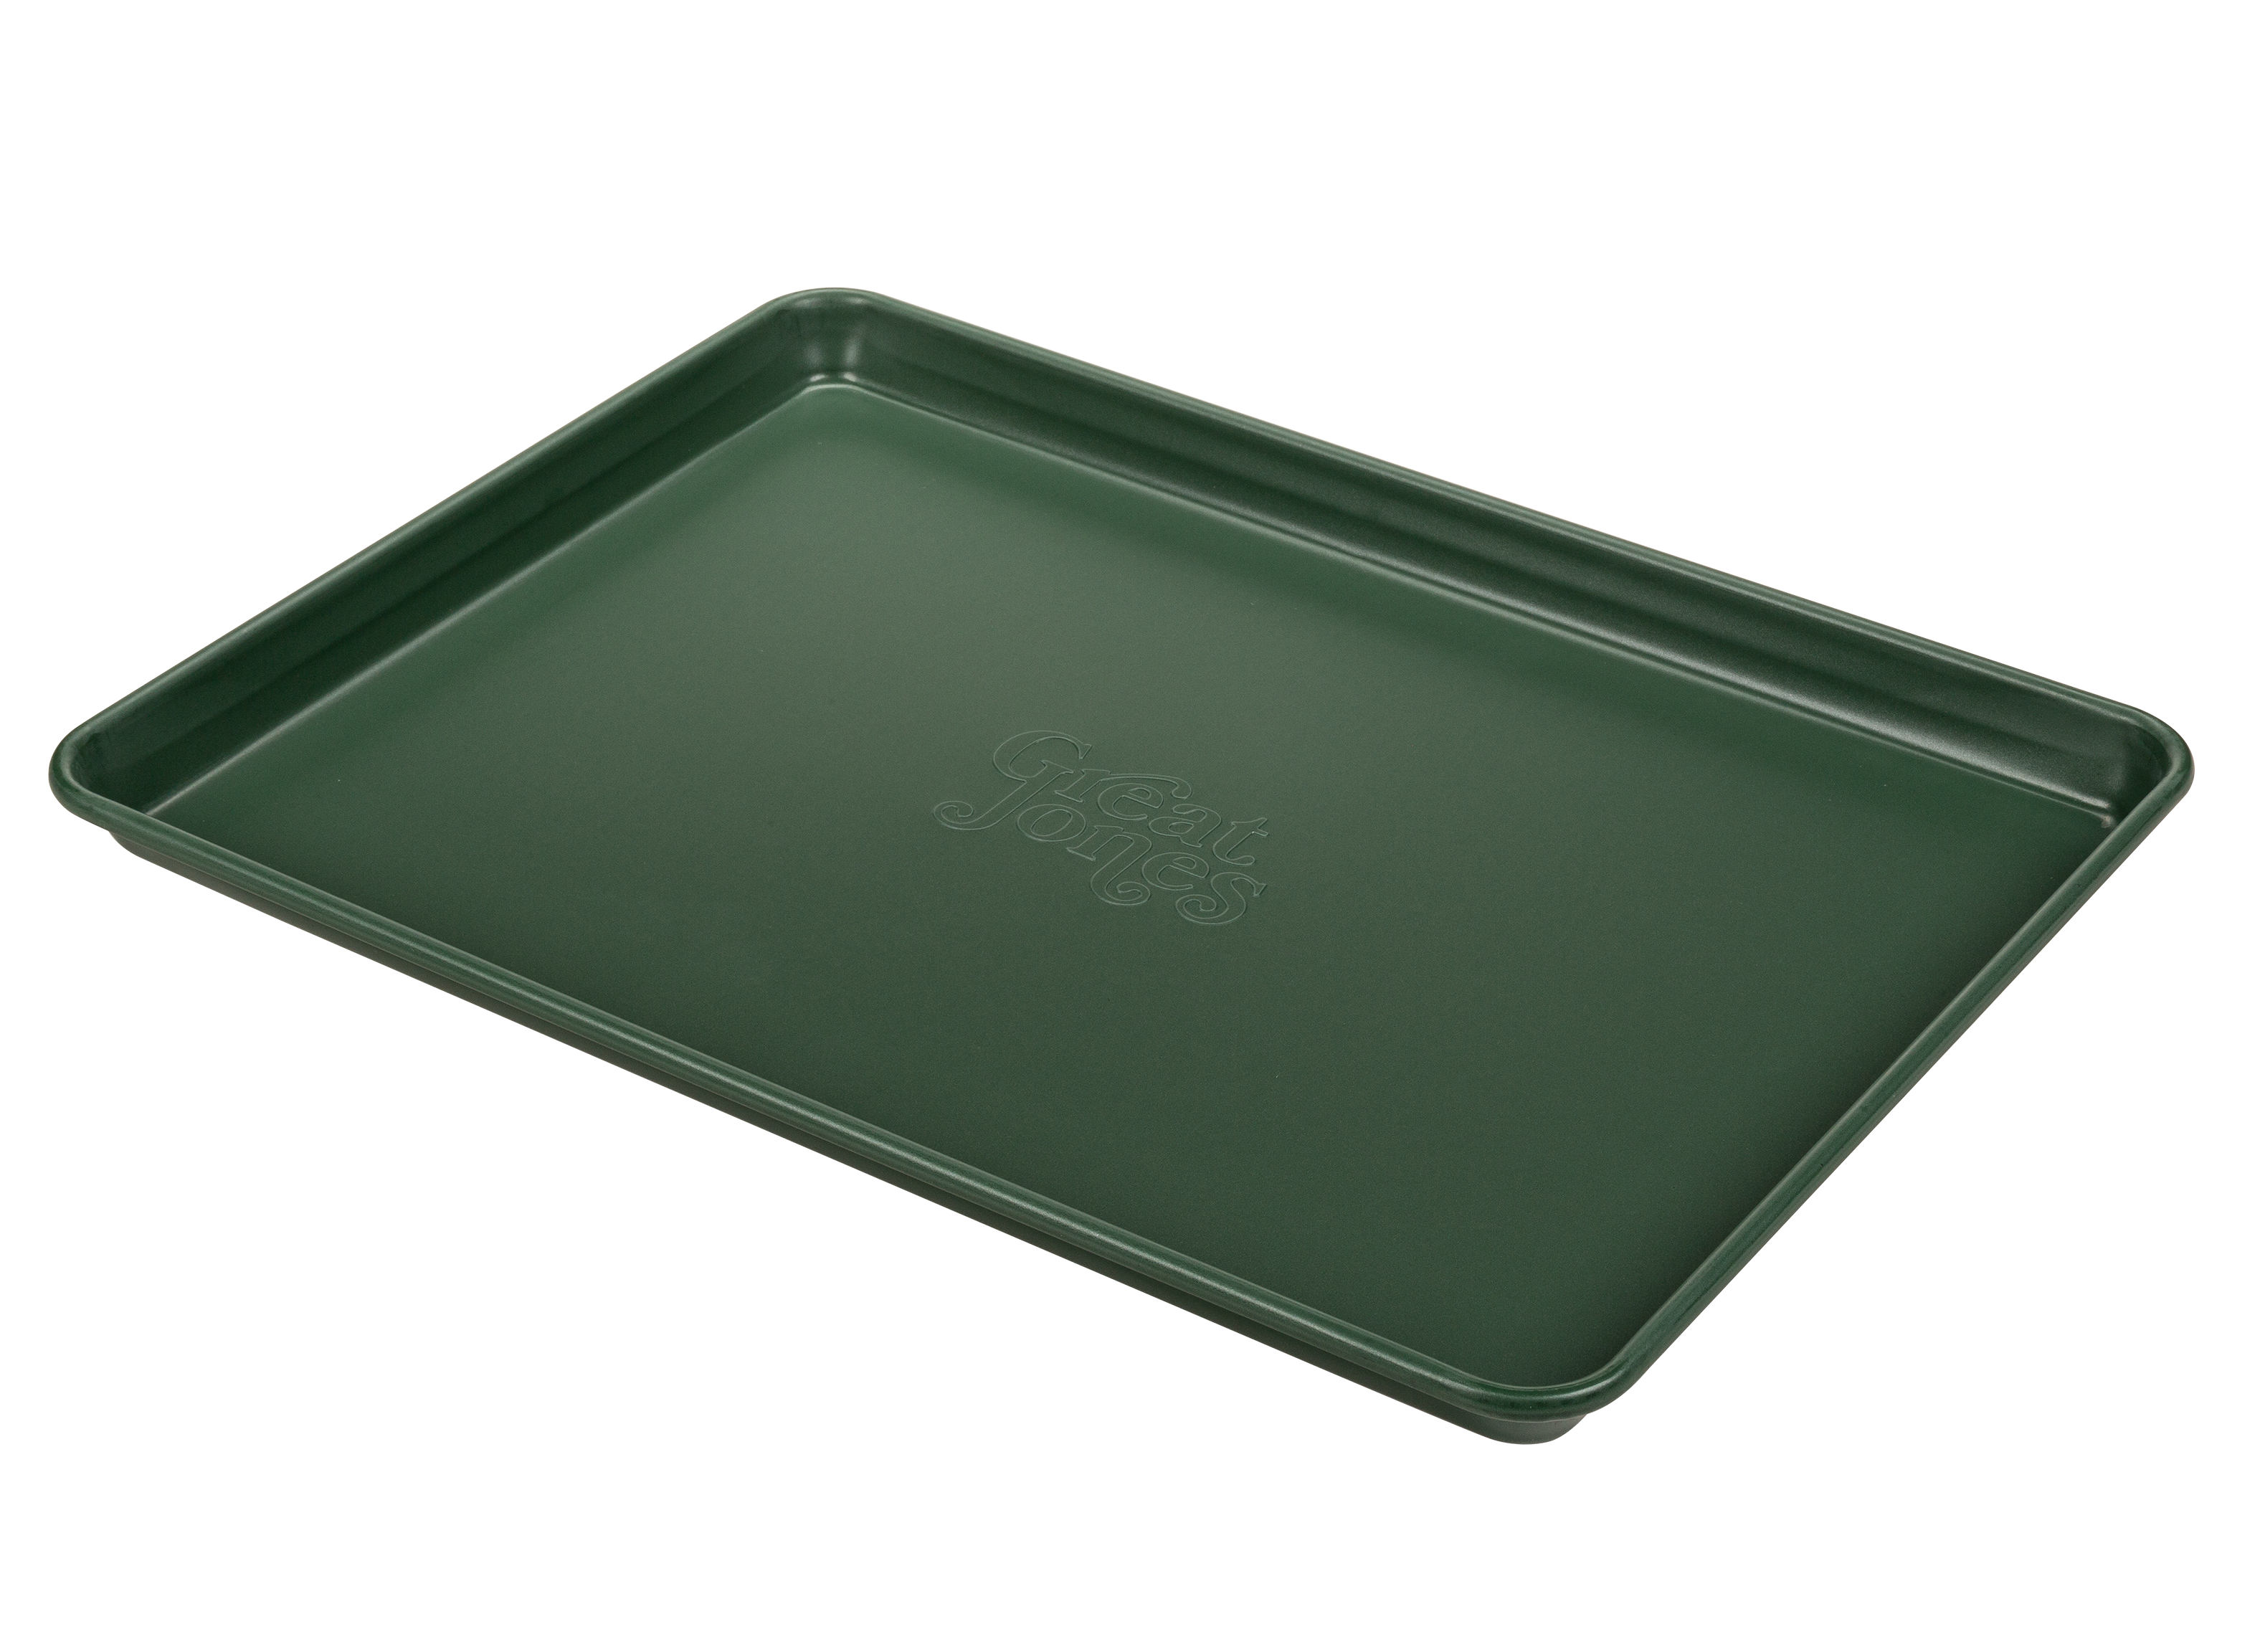 Great Jones Holy Sheet Bakeware Review - Consumer Reports